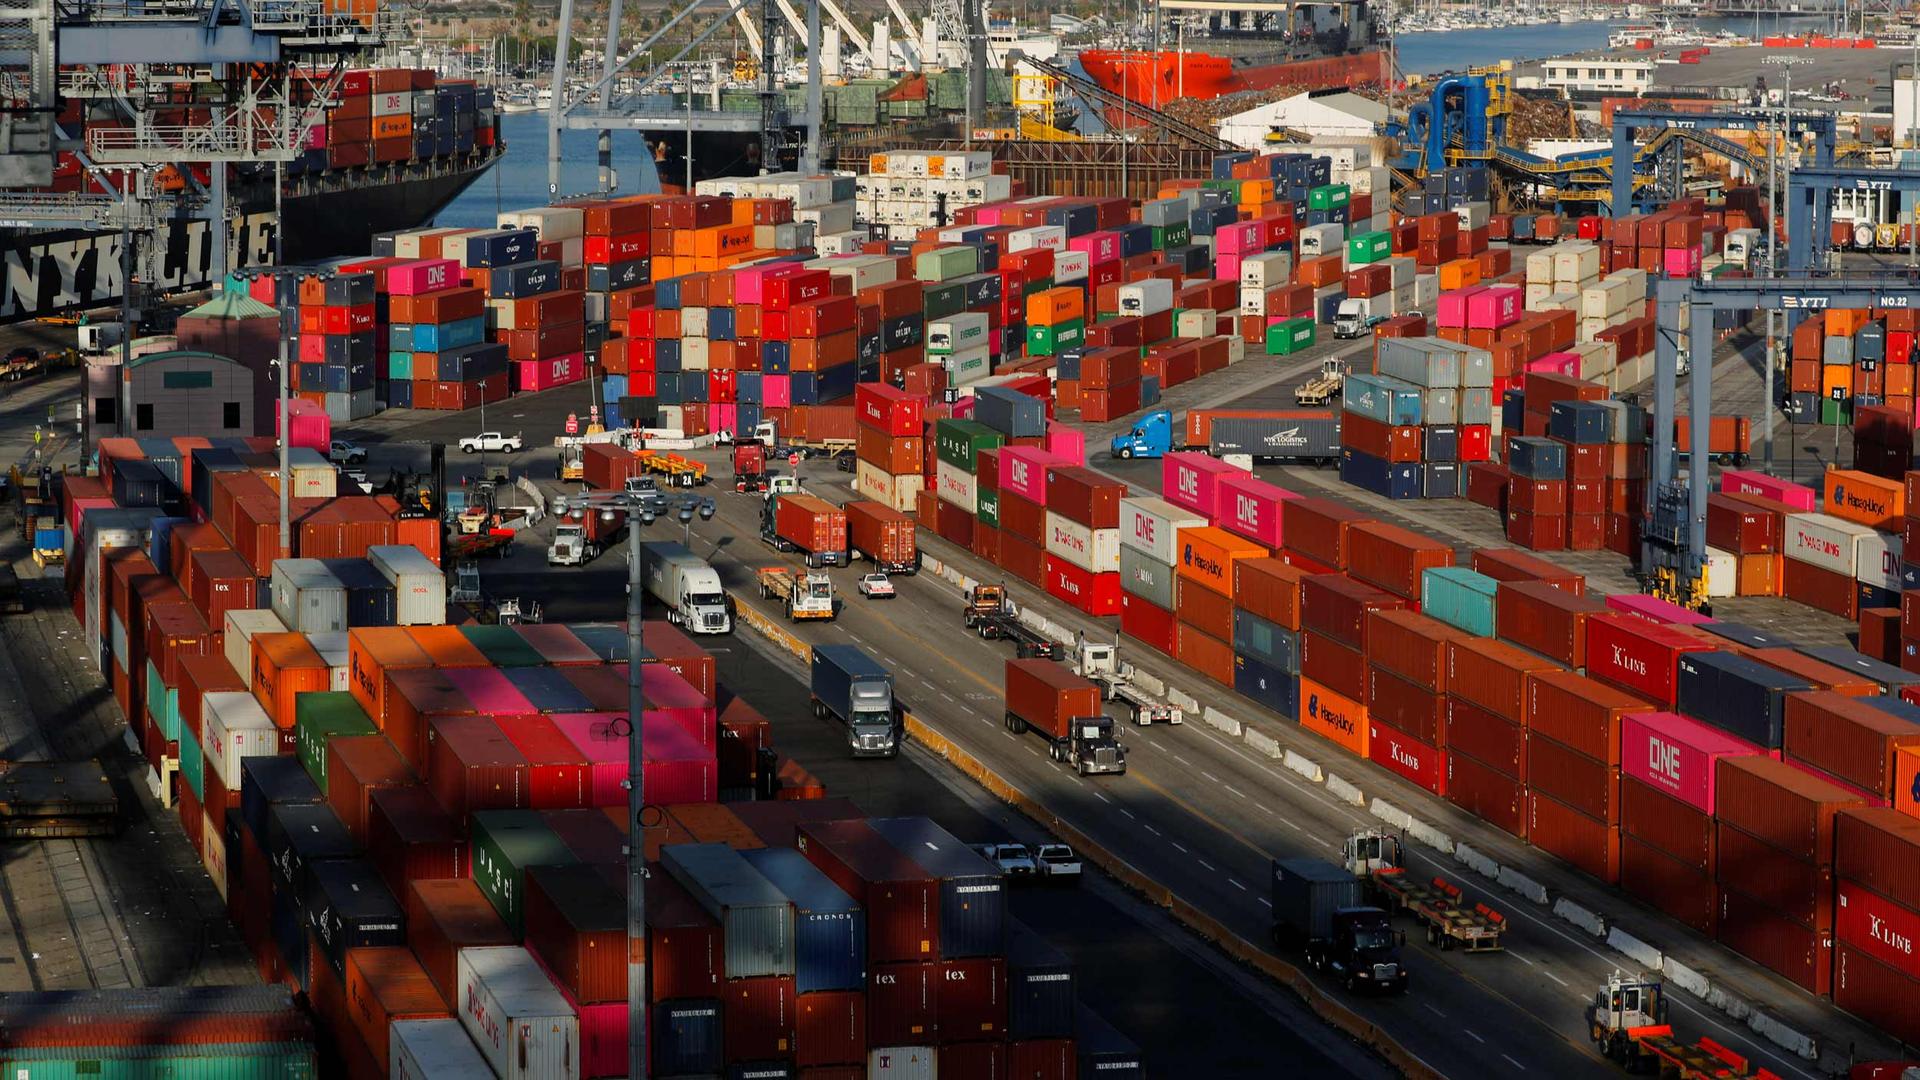 Hundreds of brightly colored shipping containers are stacked around a port